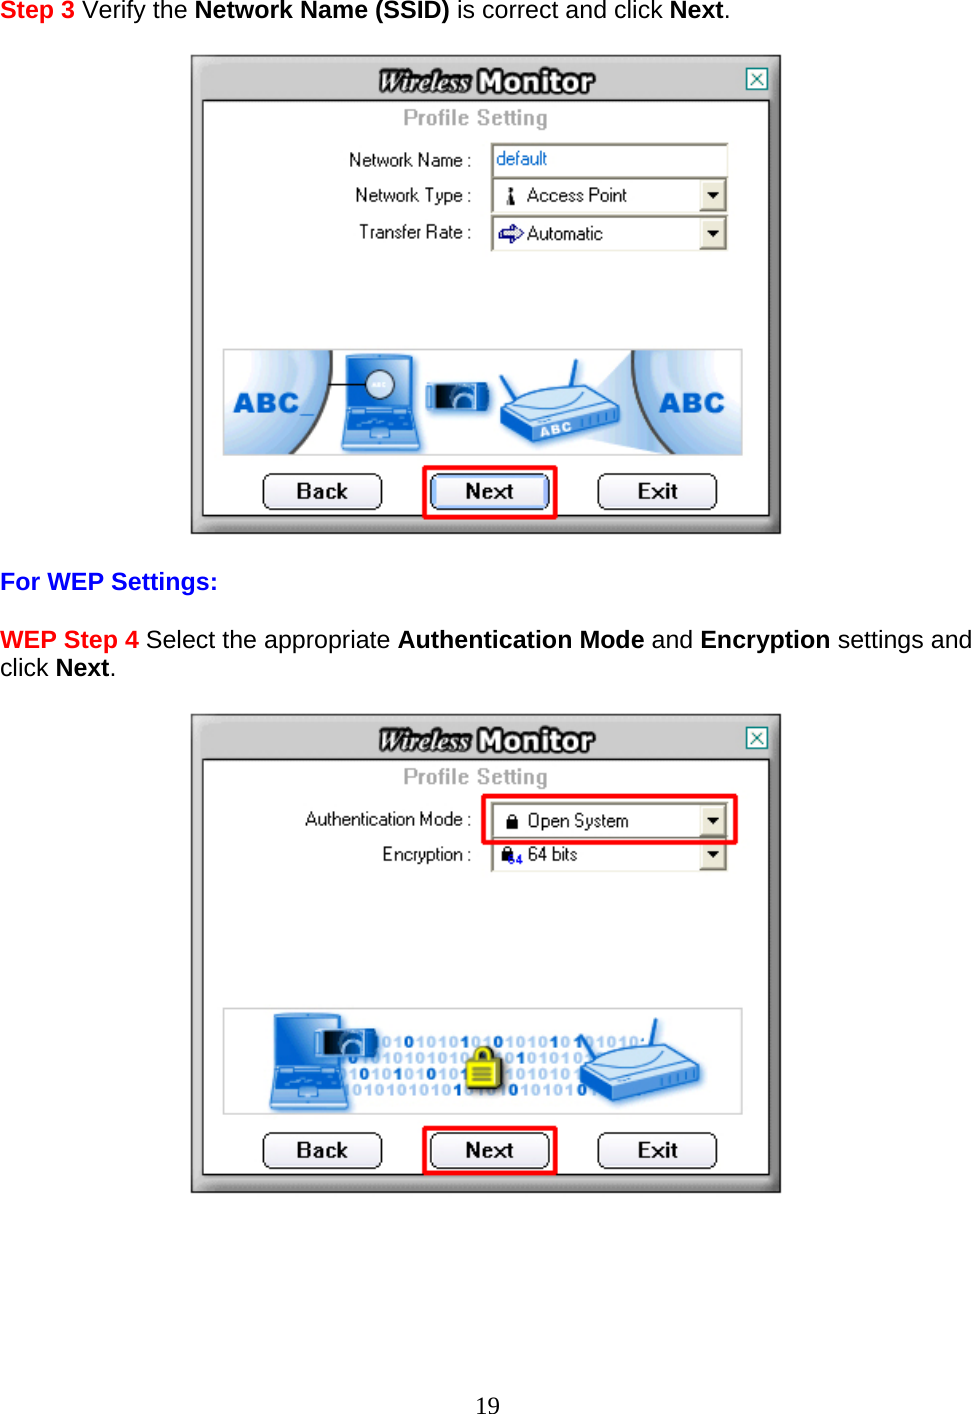 Step 3 Verify the Network Name (SSID) is correct and click Next.    For WEP Settings:  WEP Step 4 Select the appropriate Authentication Mode and Encryption settings and click Next.        19 